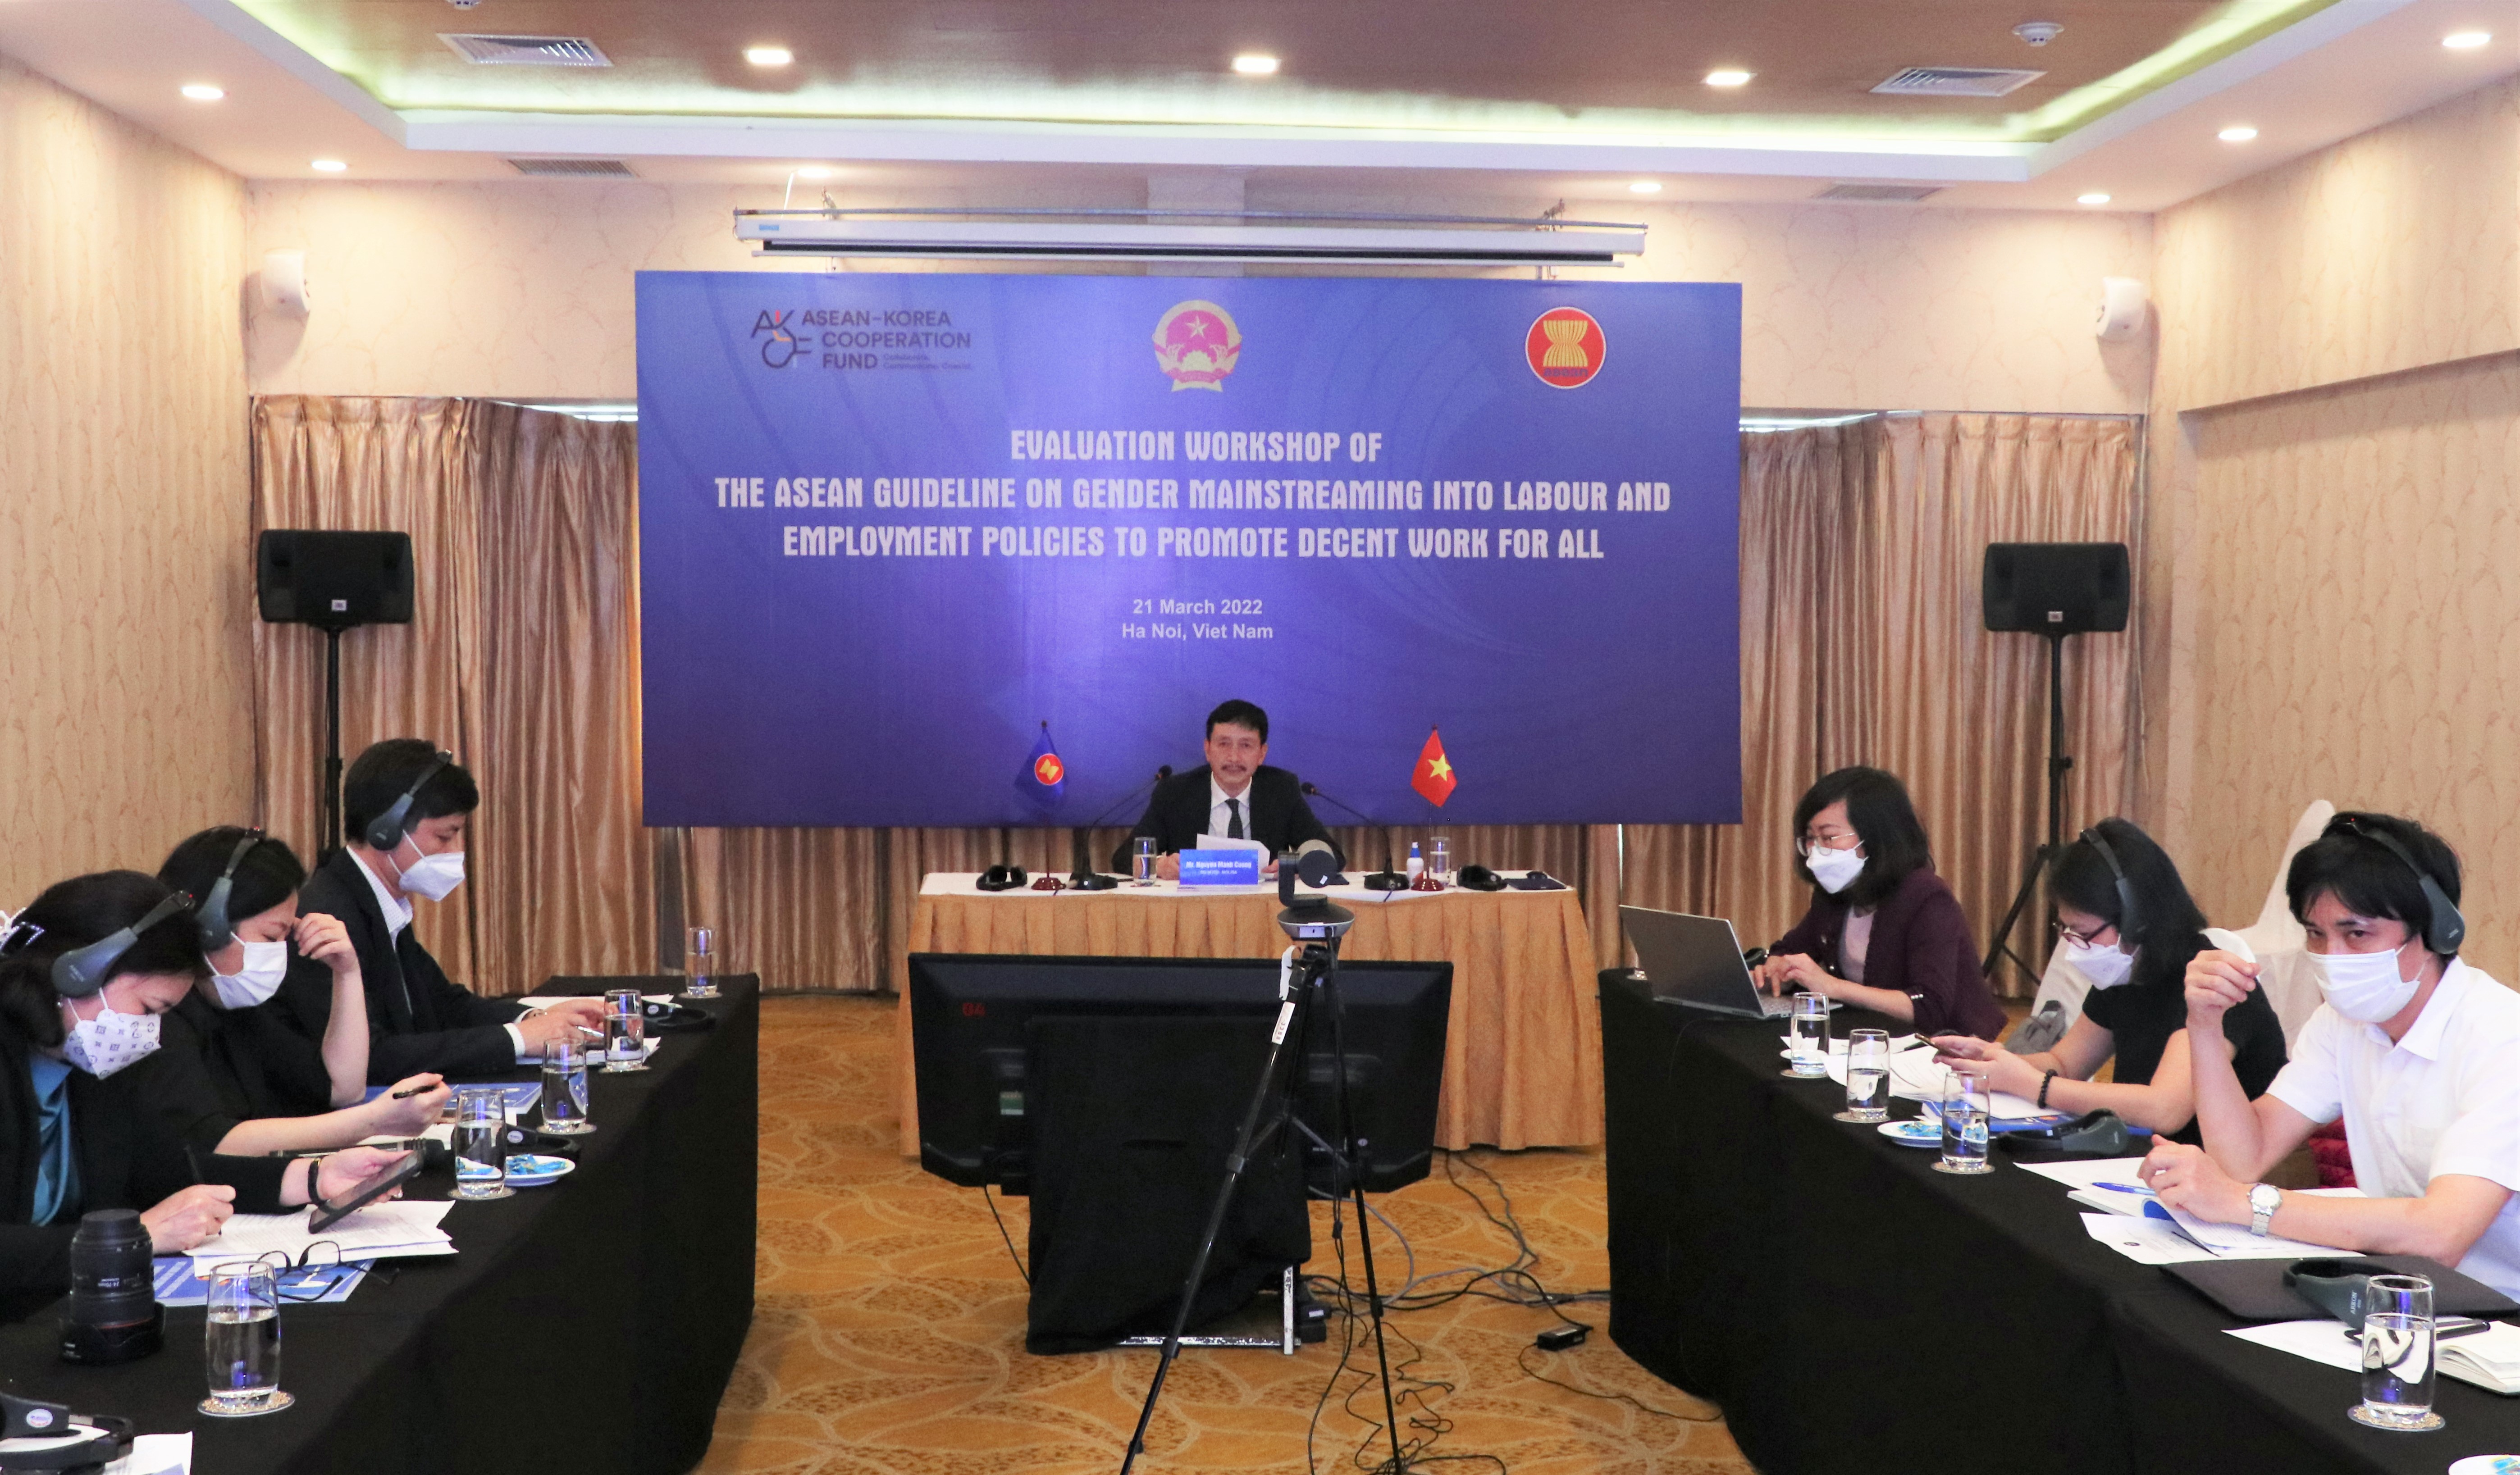 Regional workshop on evaluating the implementation of the ASEAN Guidelines on gender mainstreaming in labour and employment policies towards decent work